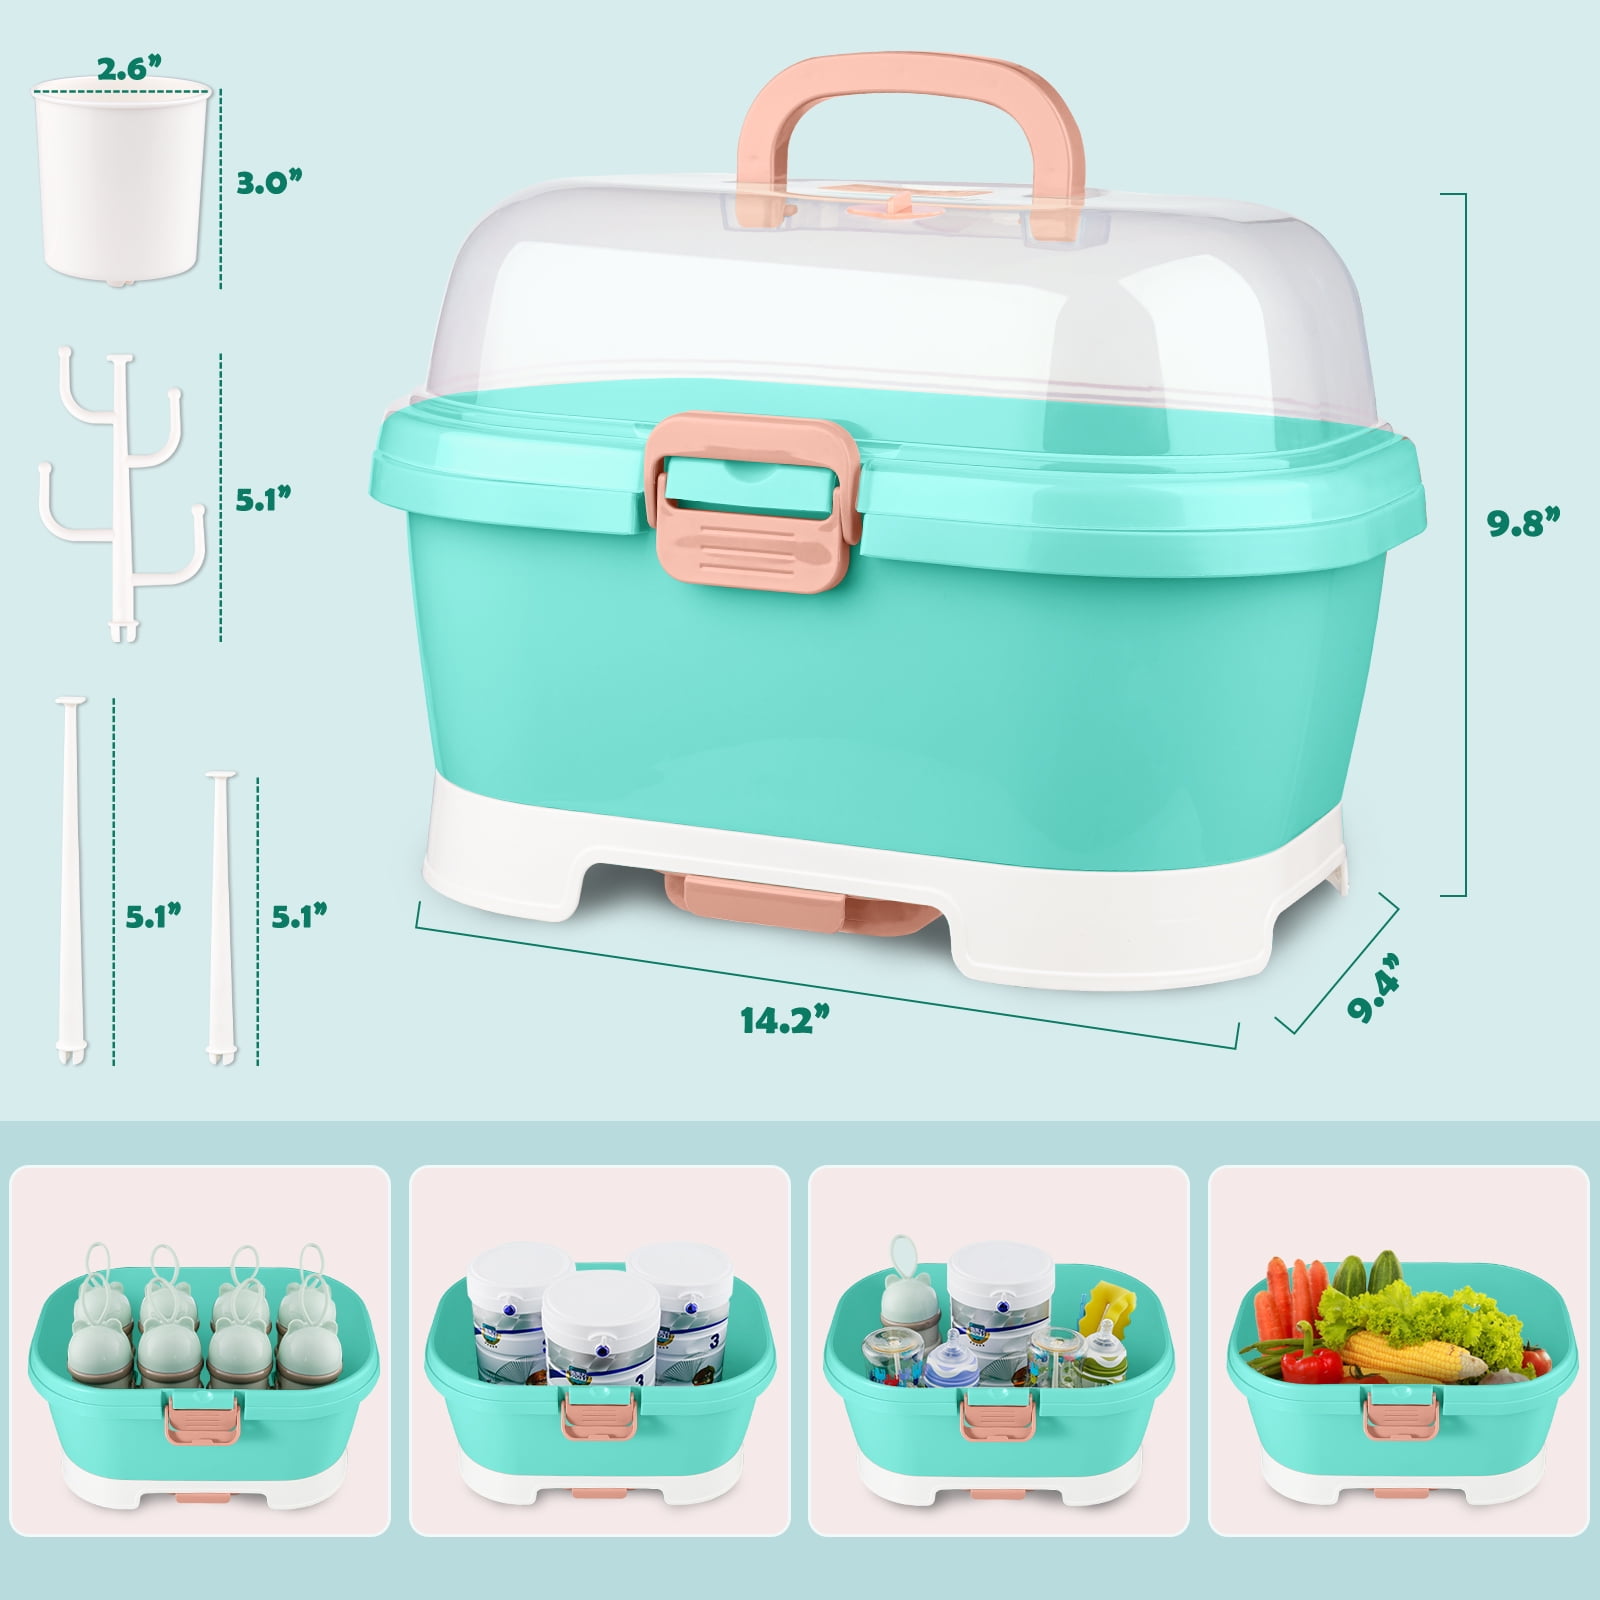 Toddmomy 1pc Portable Baby Bottle Drying Rack Storage Box Organizer with  Anti-Dust Cover,Large Nursing Bottle Storage Box Organizer for Home Kitchen